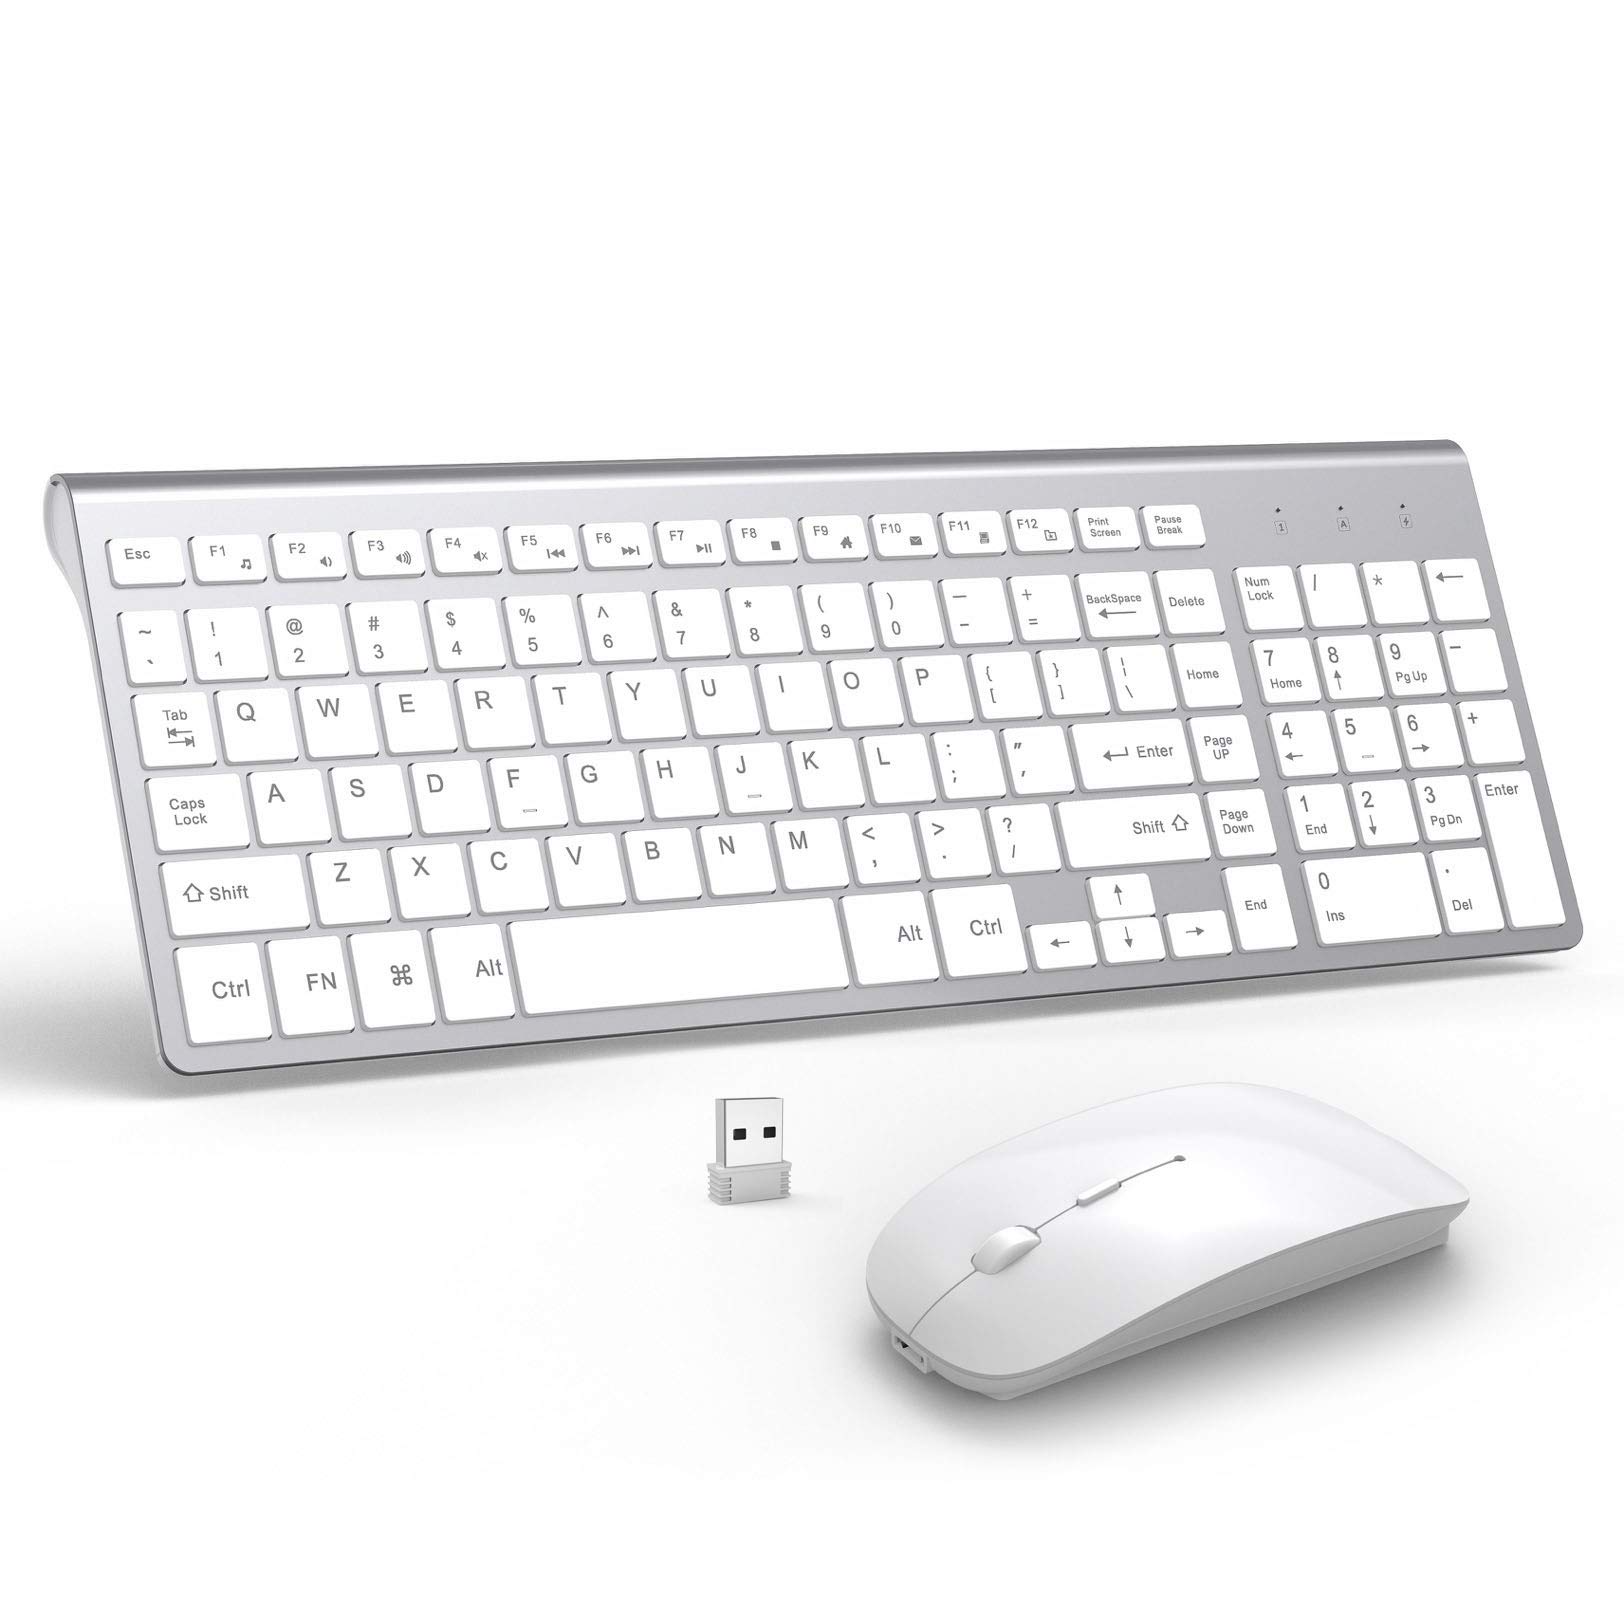 Wireless Keyboard and Mouse Combo, Gamcatz Ultra Thin Full Size Keyboard with Number Pad and Rechargeable Slient Click Mouse for Mac iMac MacBook Air PC Laptop Tablet Computer Windows-Silver White
